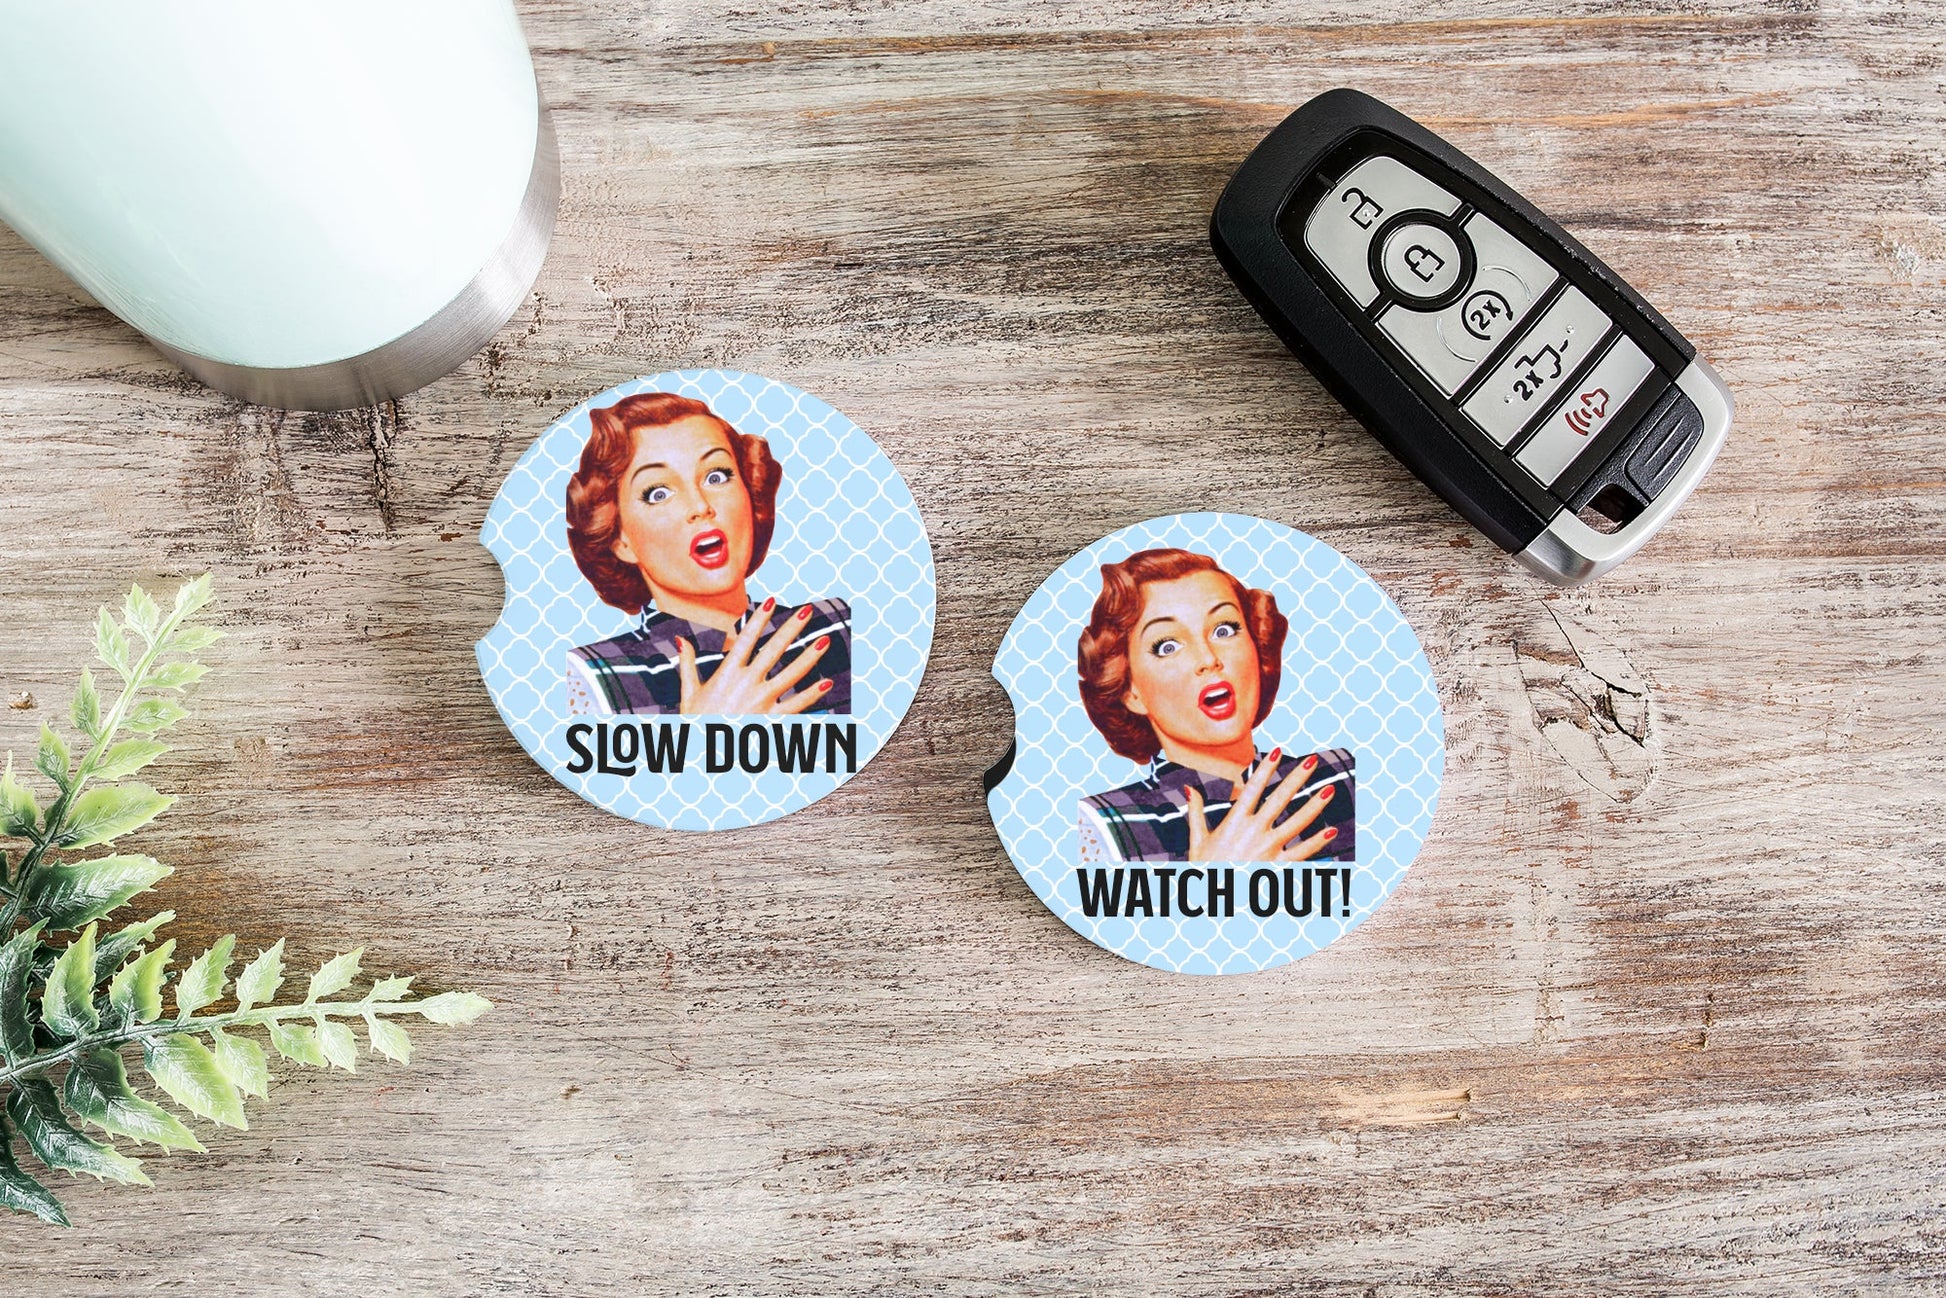 Slow Down! Watch out! - Funny retro housewife car coasters to remind your loved ones to slow down! - Jammin Threads